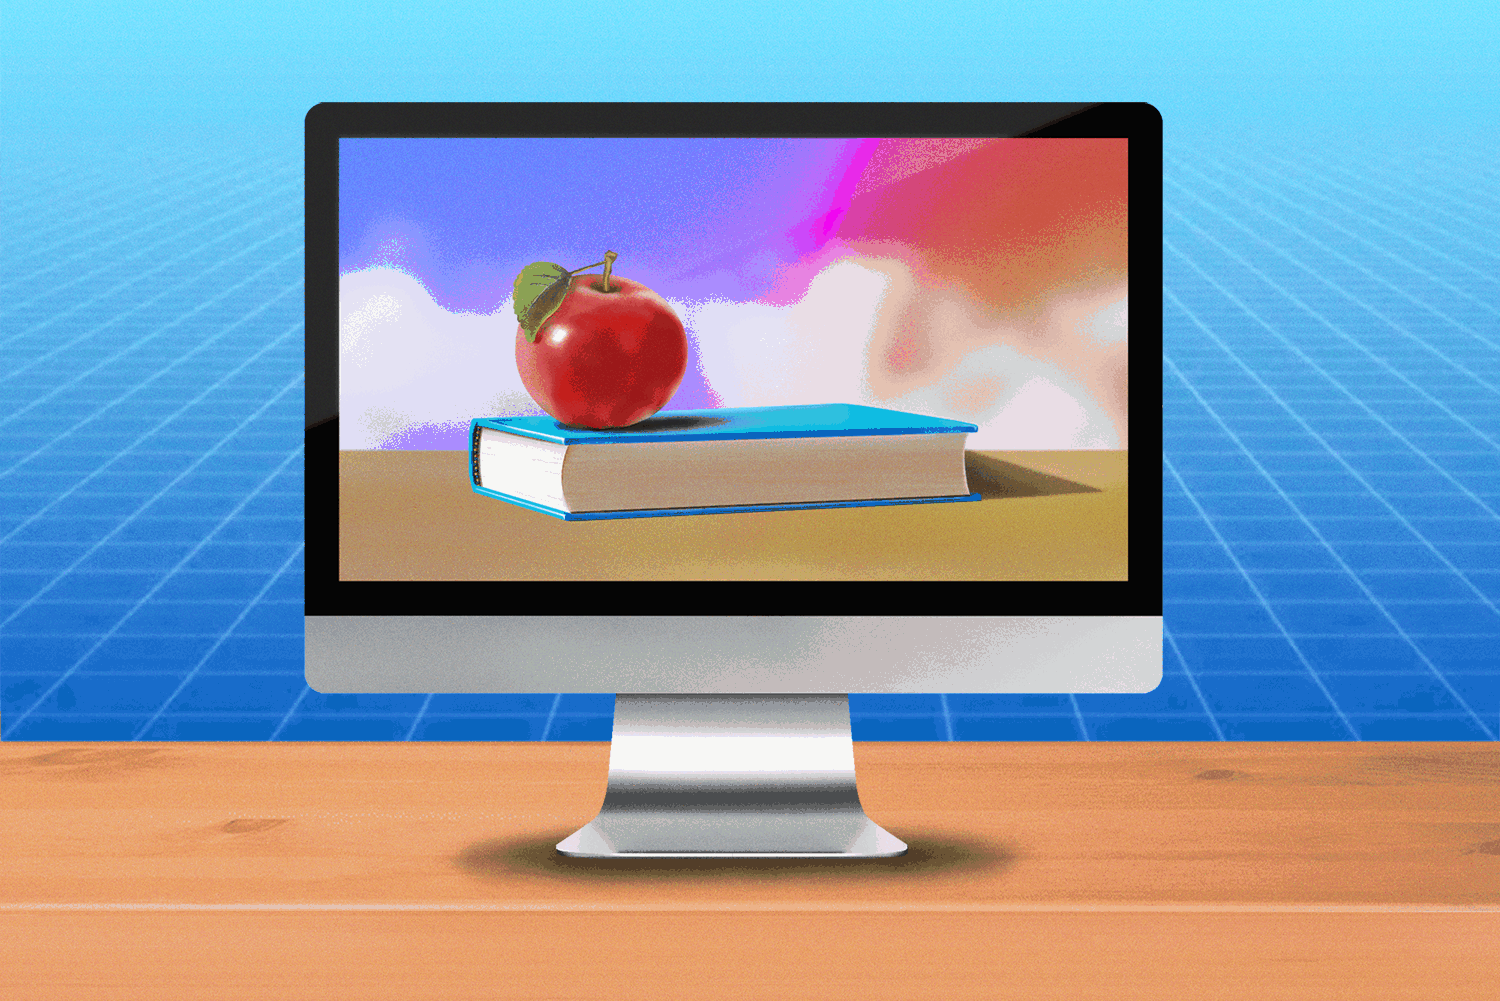 A computer monitor on a table with an image of an apple on a book. The background is colourful.